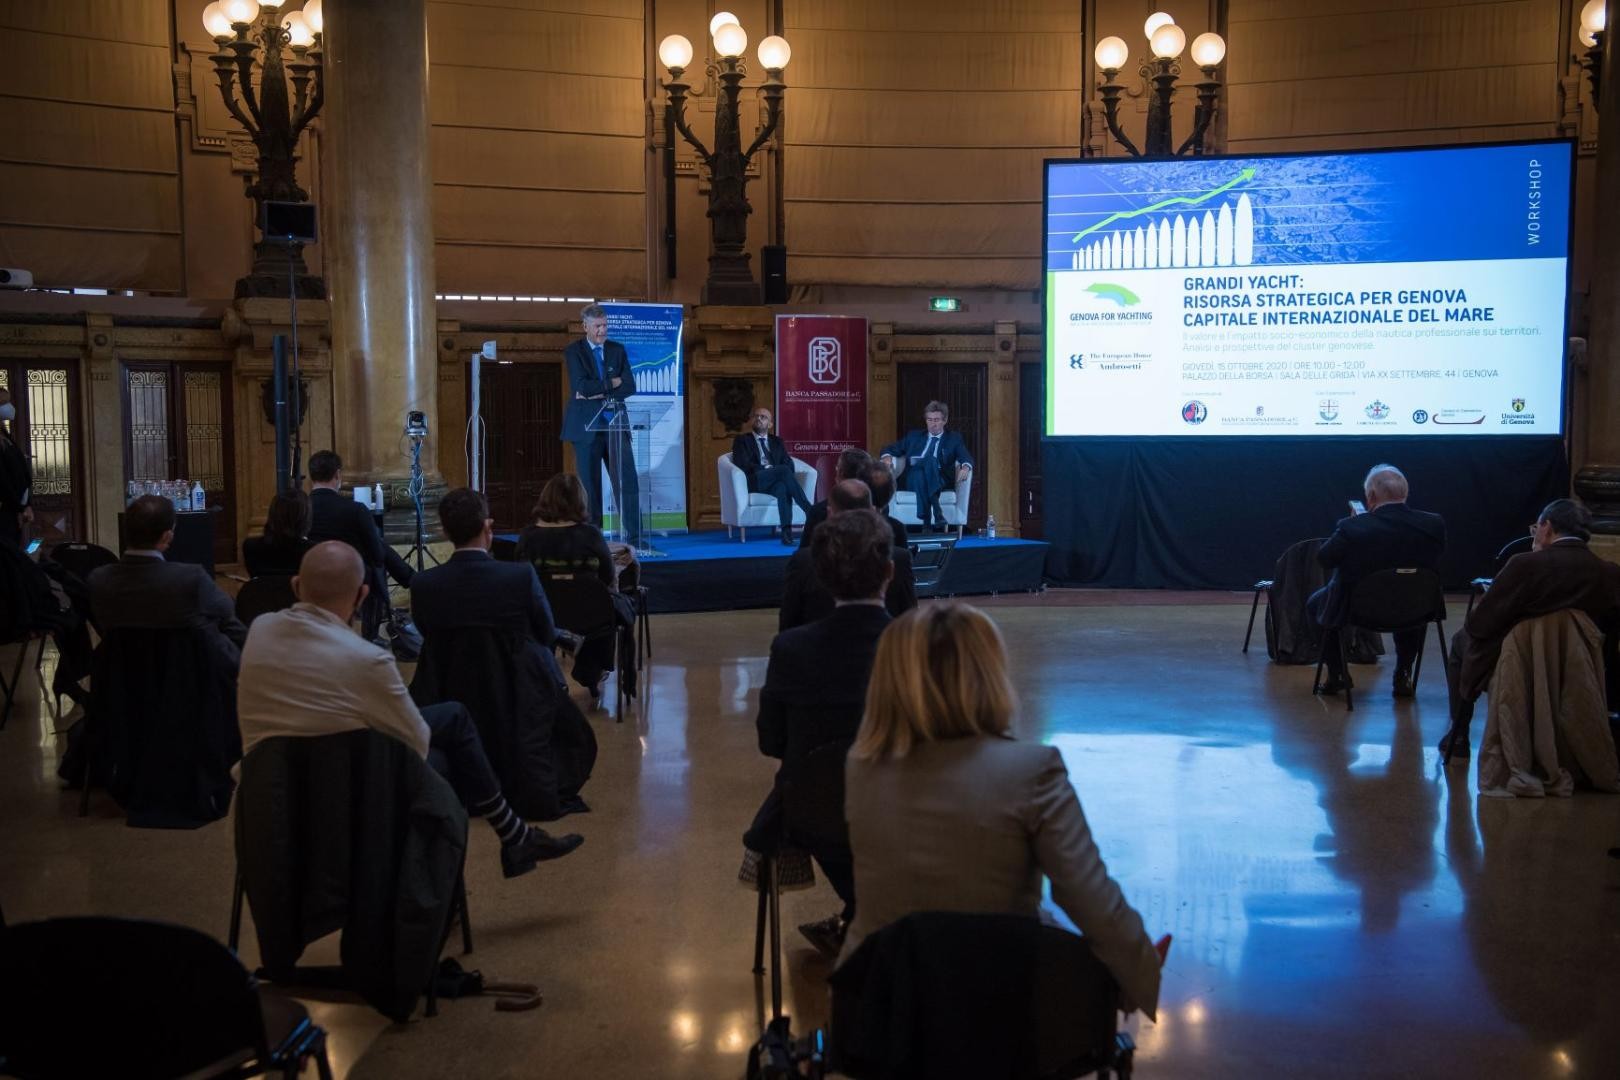 Genova for Yachting presents the results of the Study by The European House-Ambrosetti in Genoa